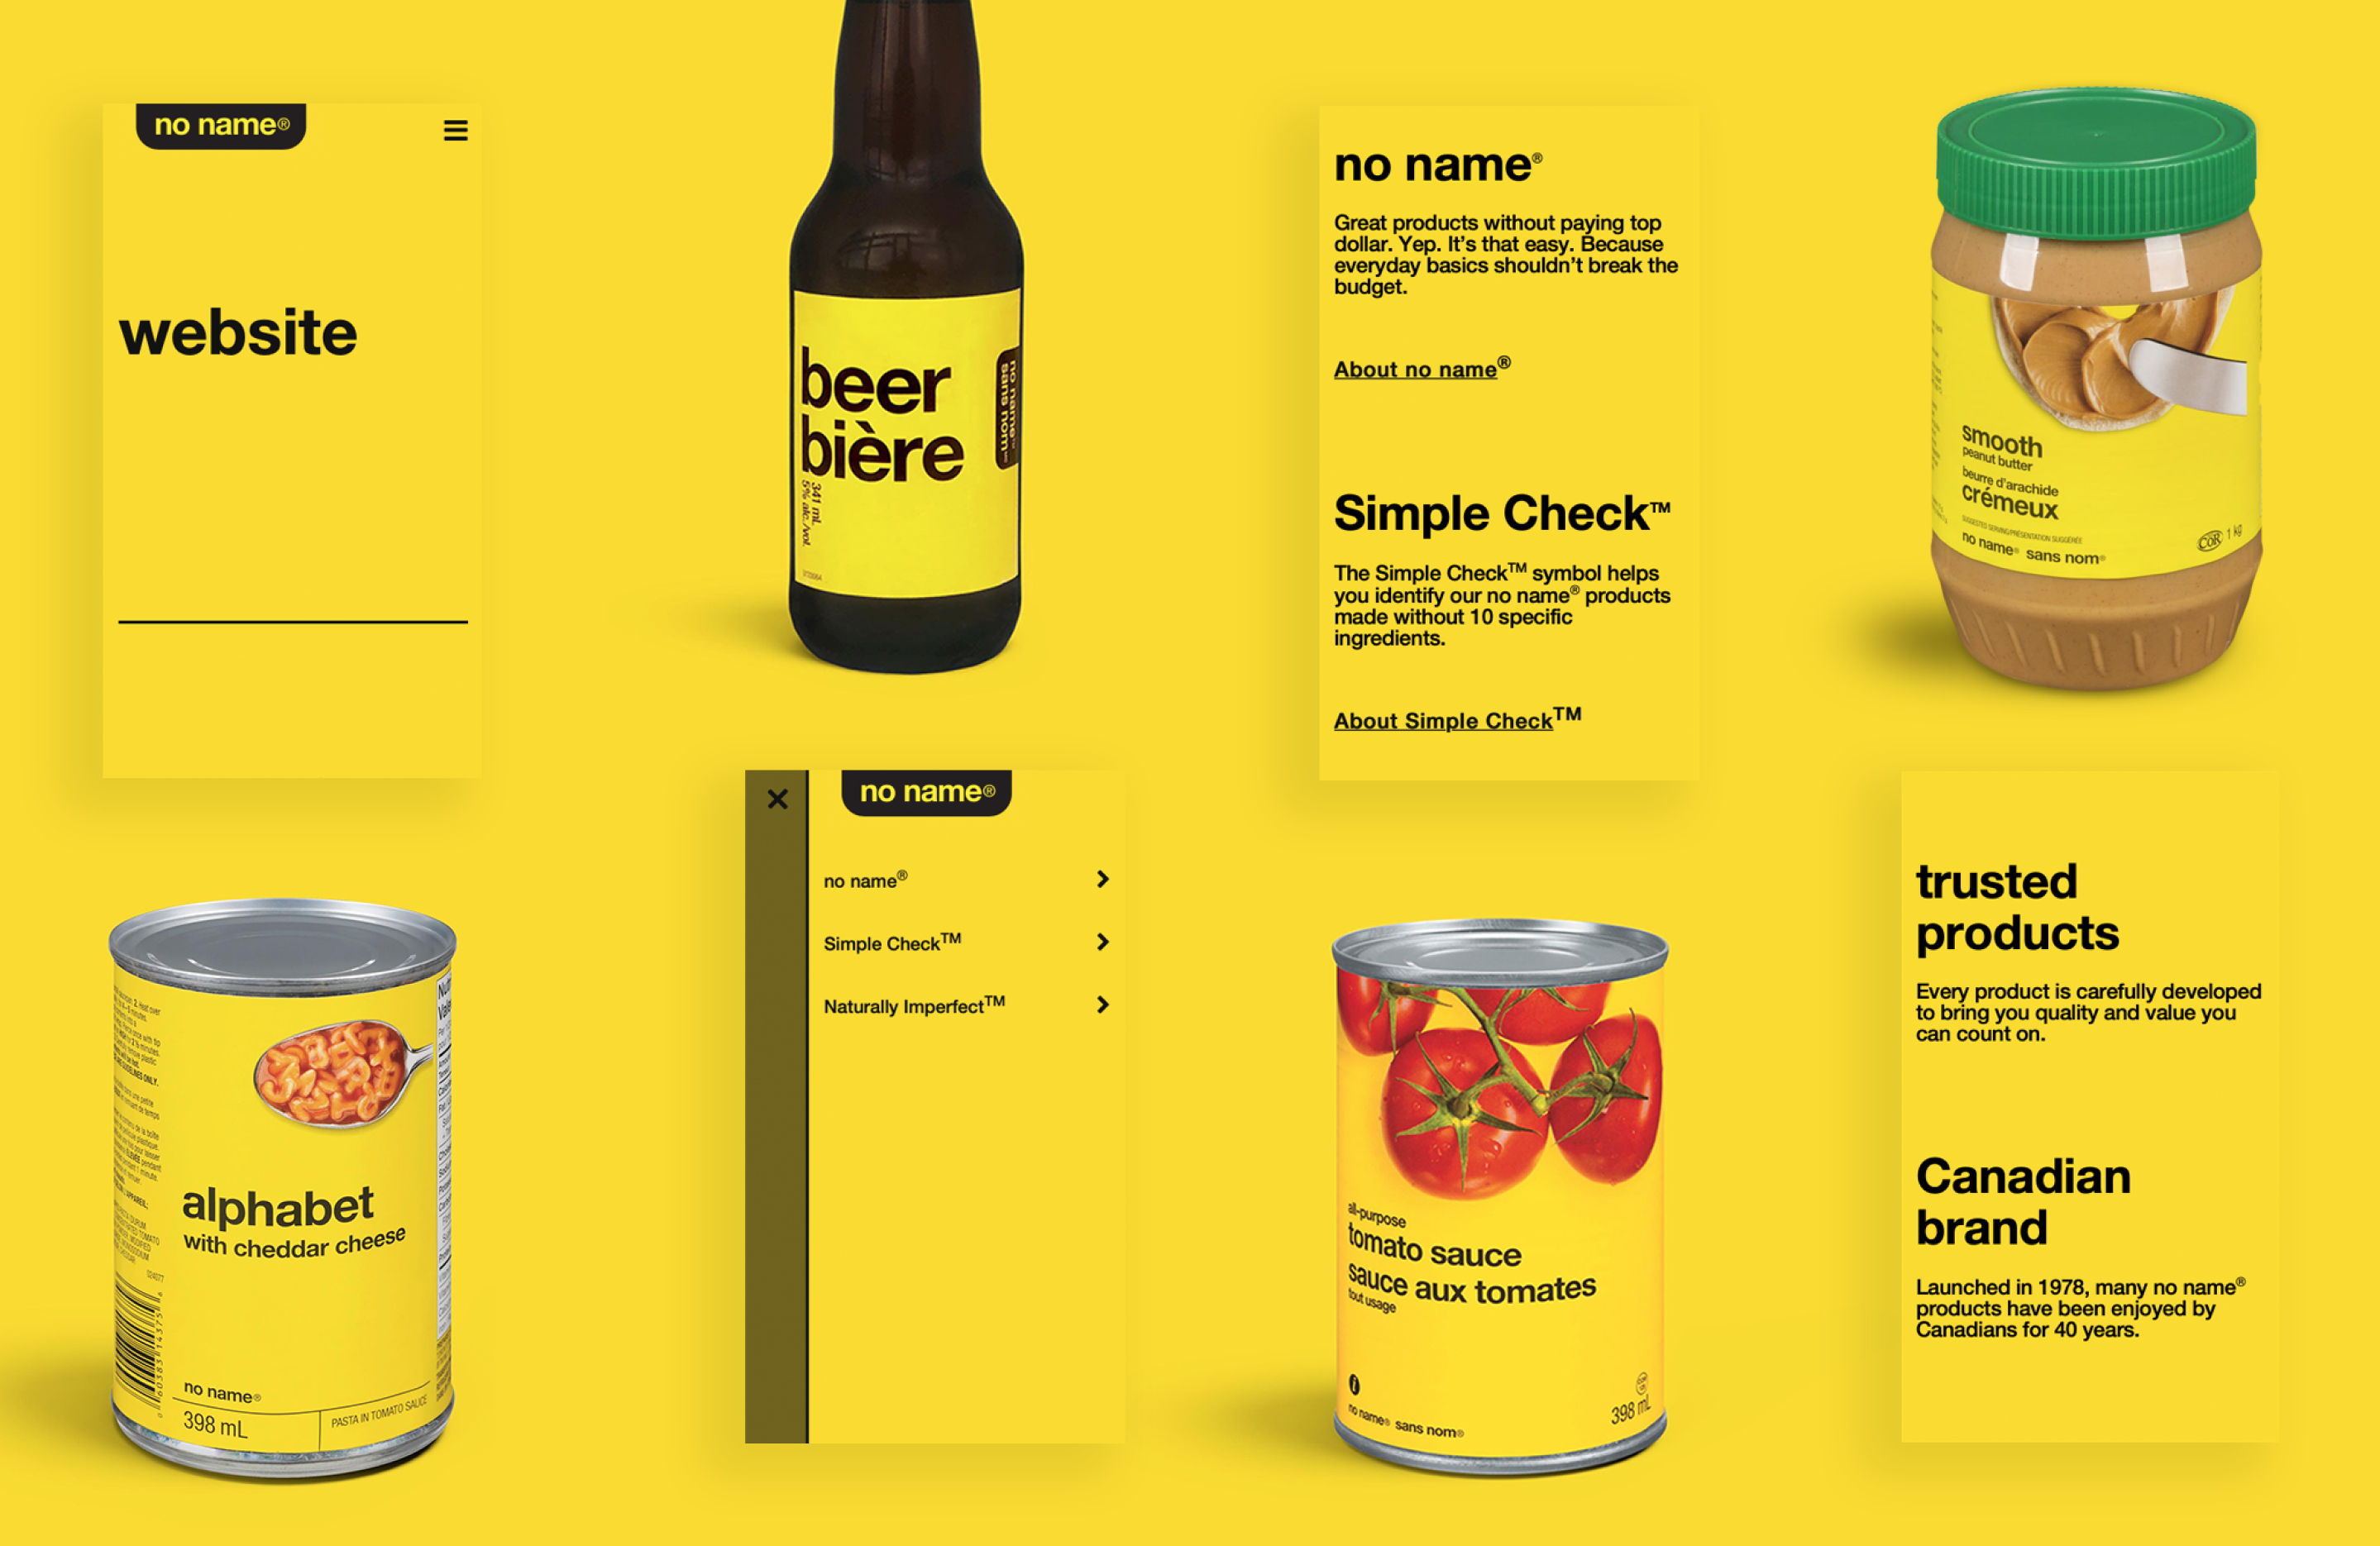 Examples of mobile designs for the noname website alongside famous noname product packaging for products like peanut butter and tomato sauce